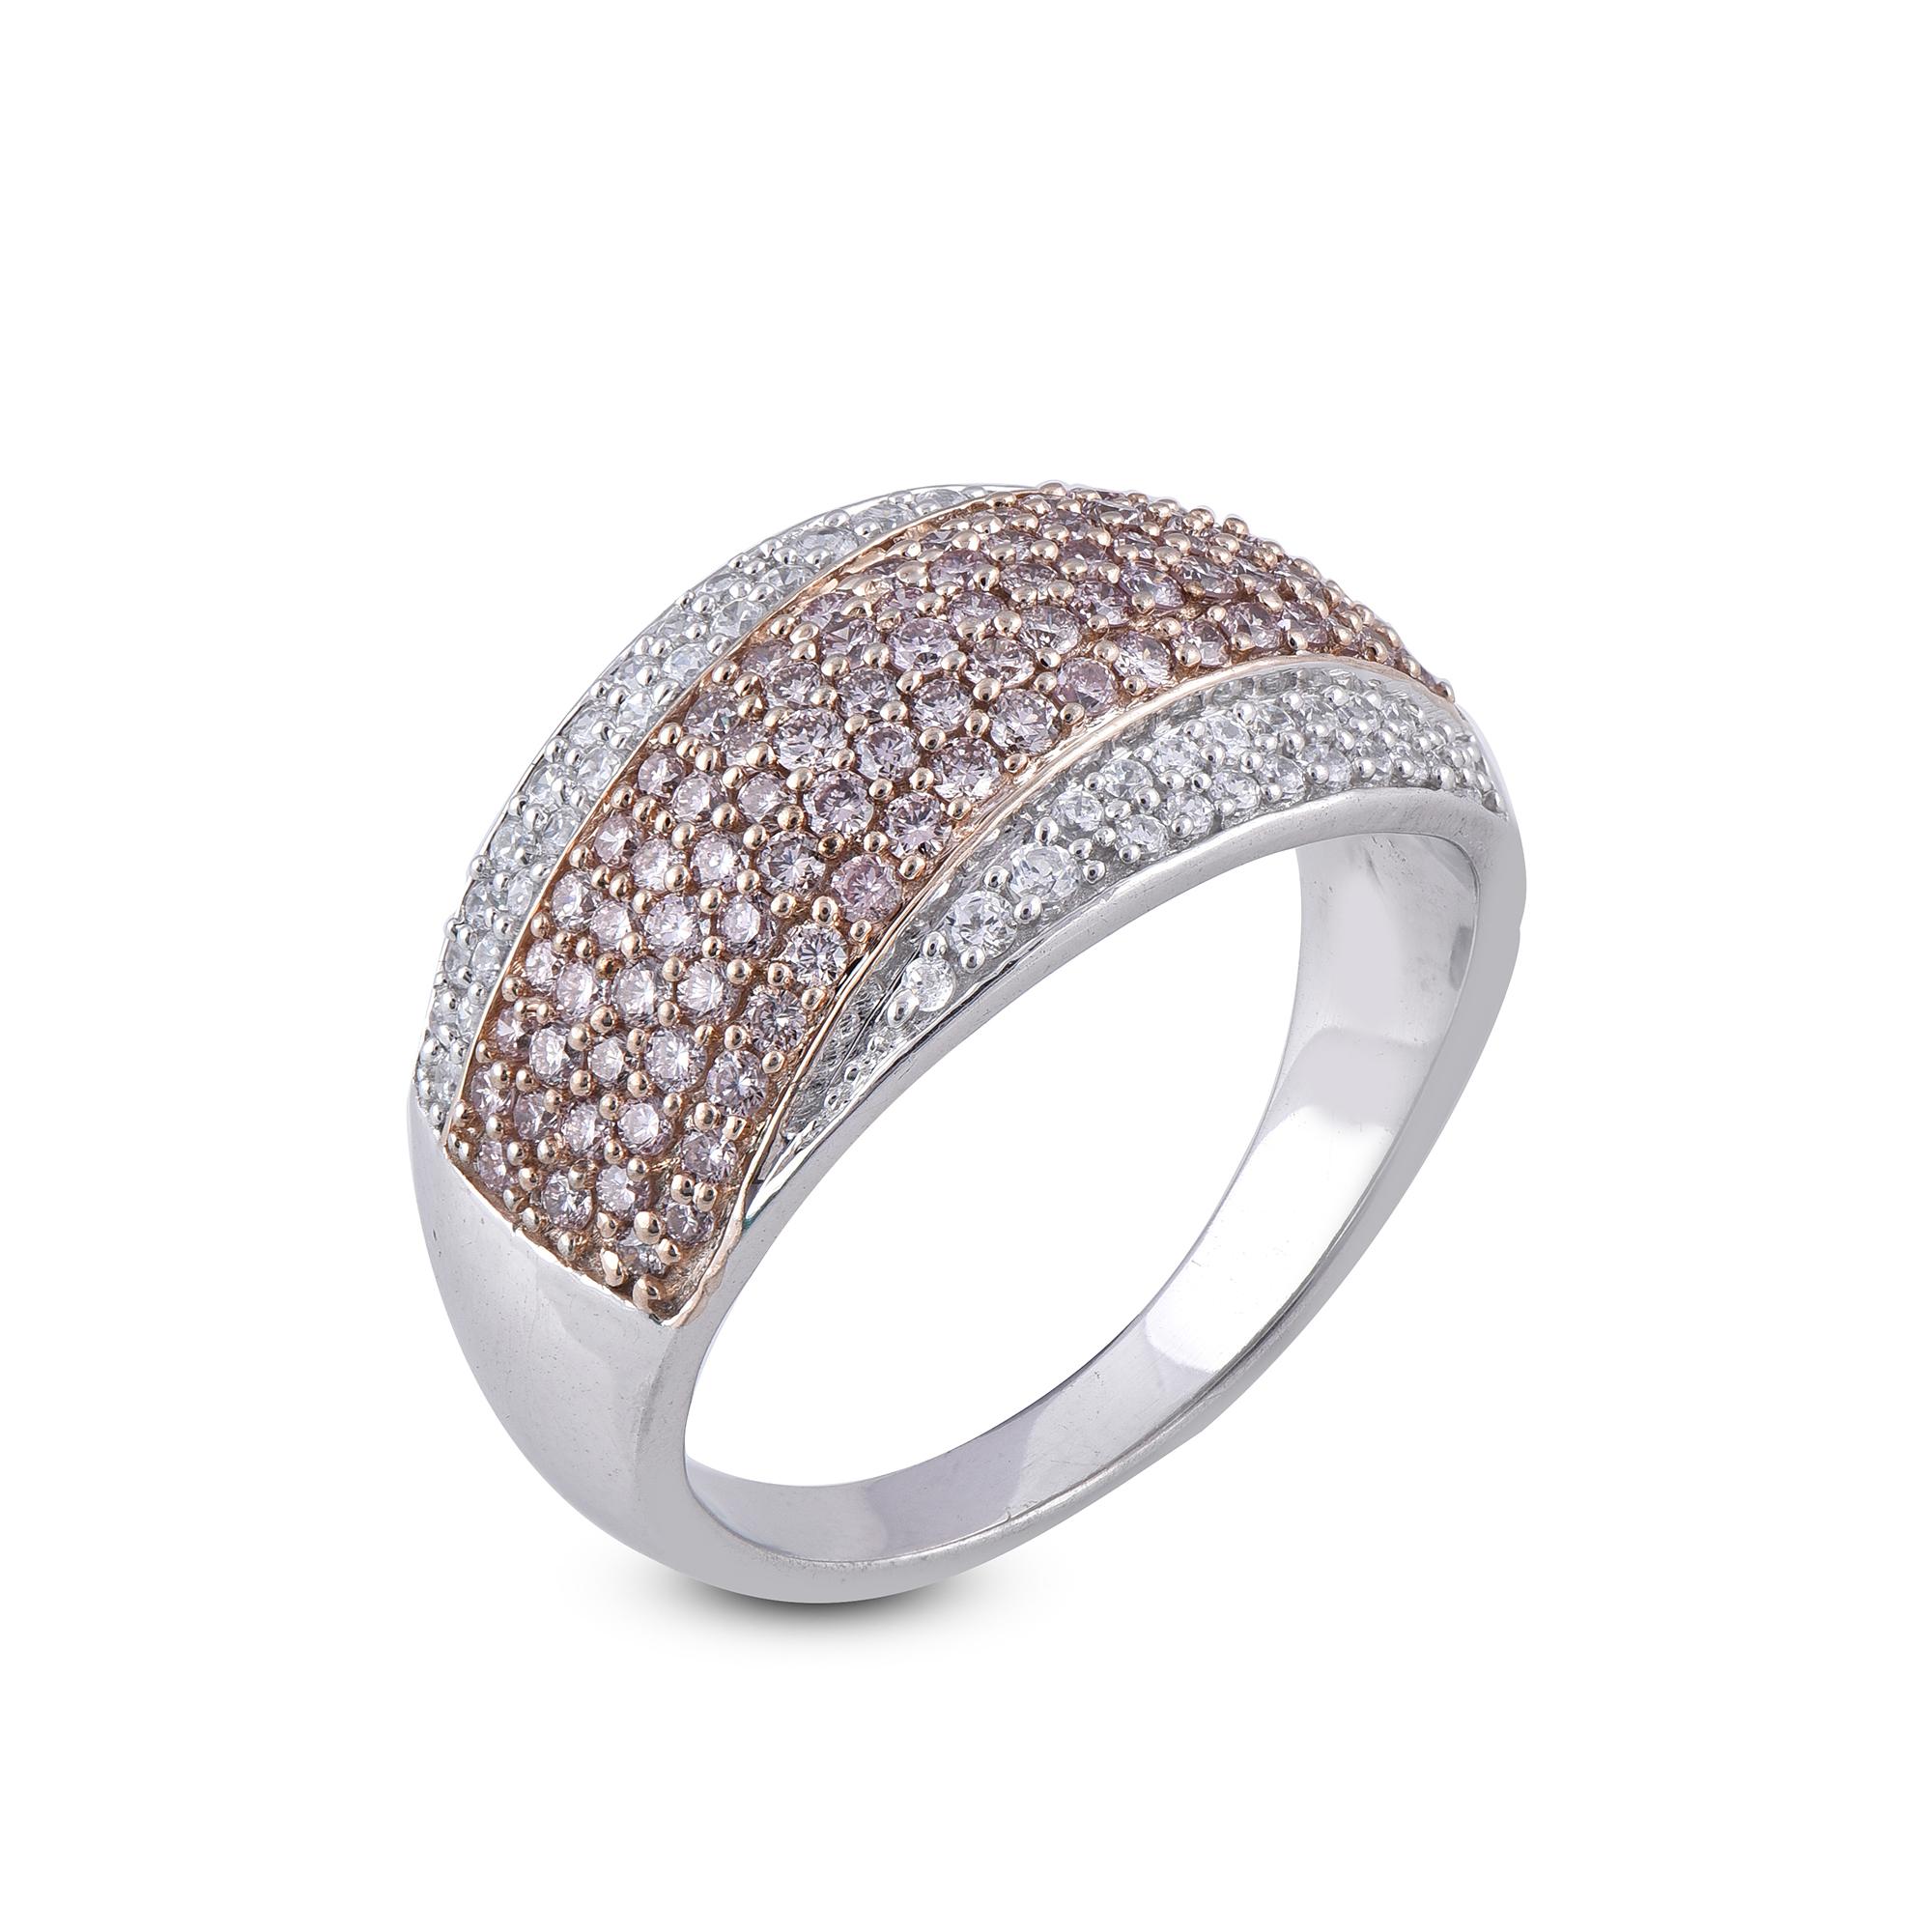 With one look of this 1.01 Carat Round diamond multi row wedding band crafted in 18 kt white gold. This band is beautifully designed and studded with 44 white and 93 pink diamond in pave setting. We only use 100% natural diamond which shines in H-I